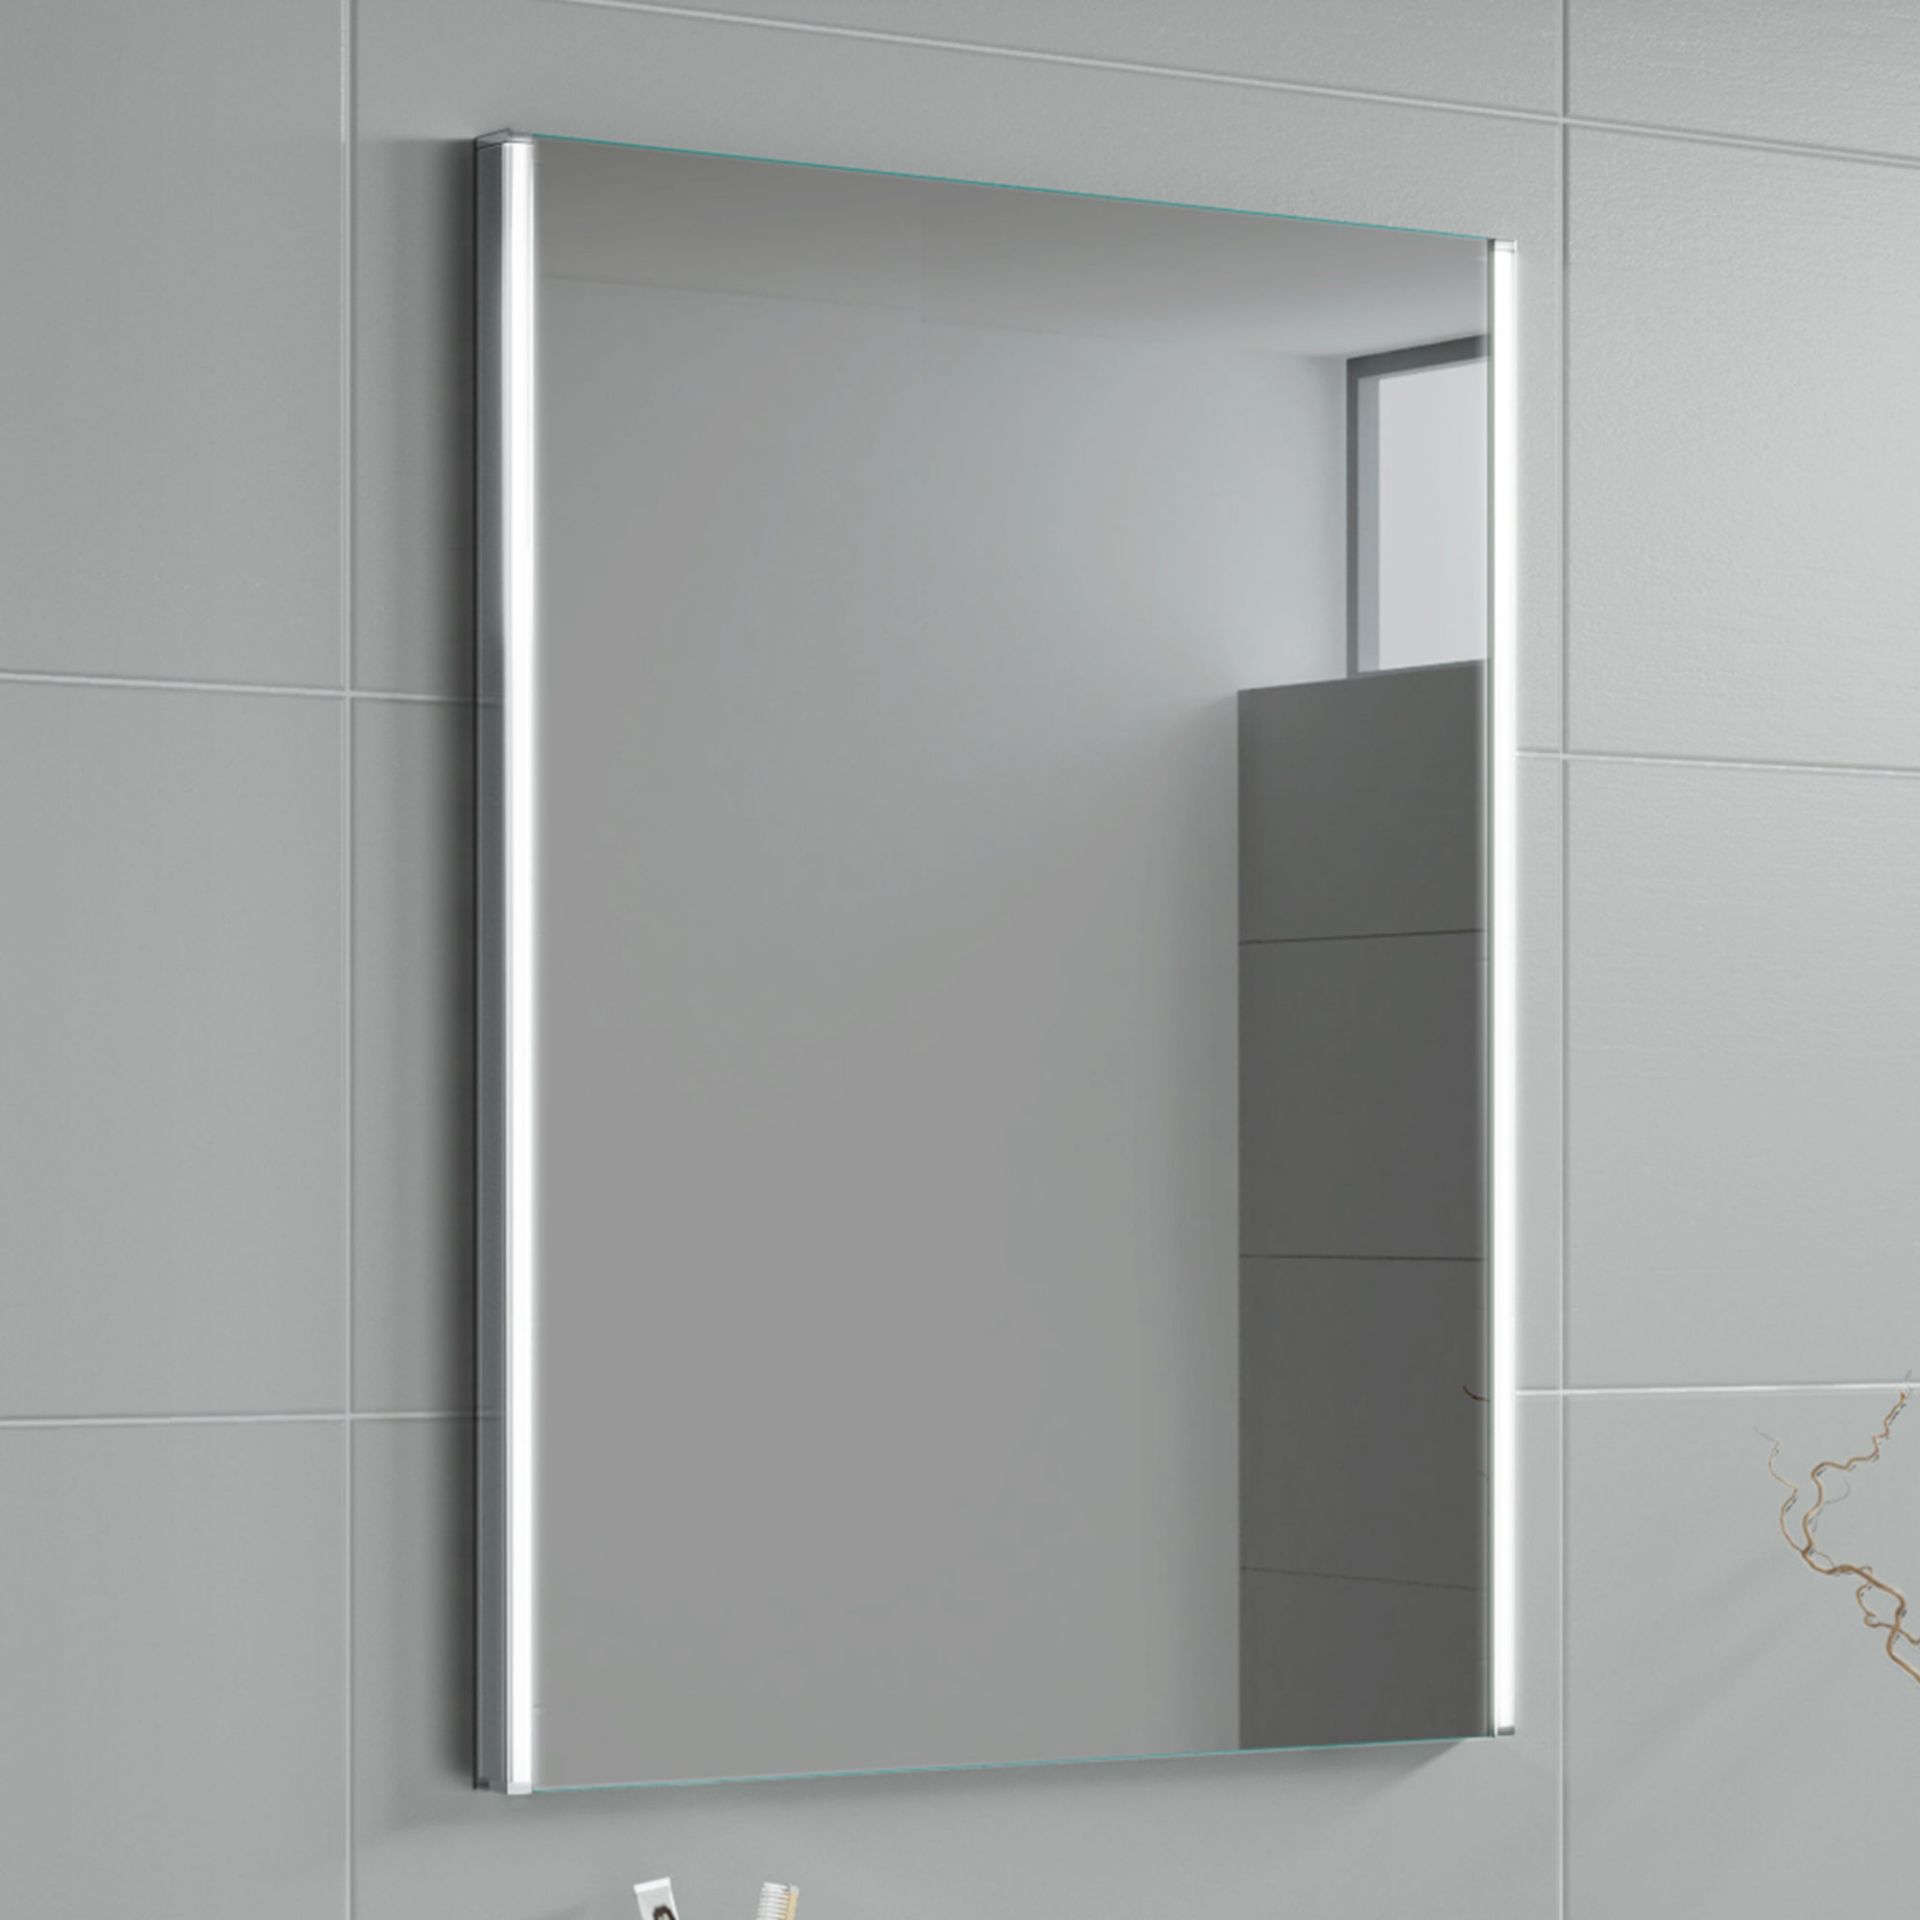 (J119) 500x700mm Lunar LED Mirror - Battery Operated. RRP £299.99. Energy saving controlled On / Off - Image 2 of 4